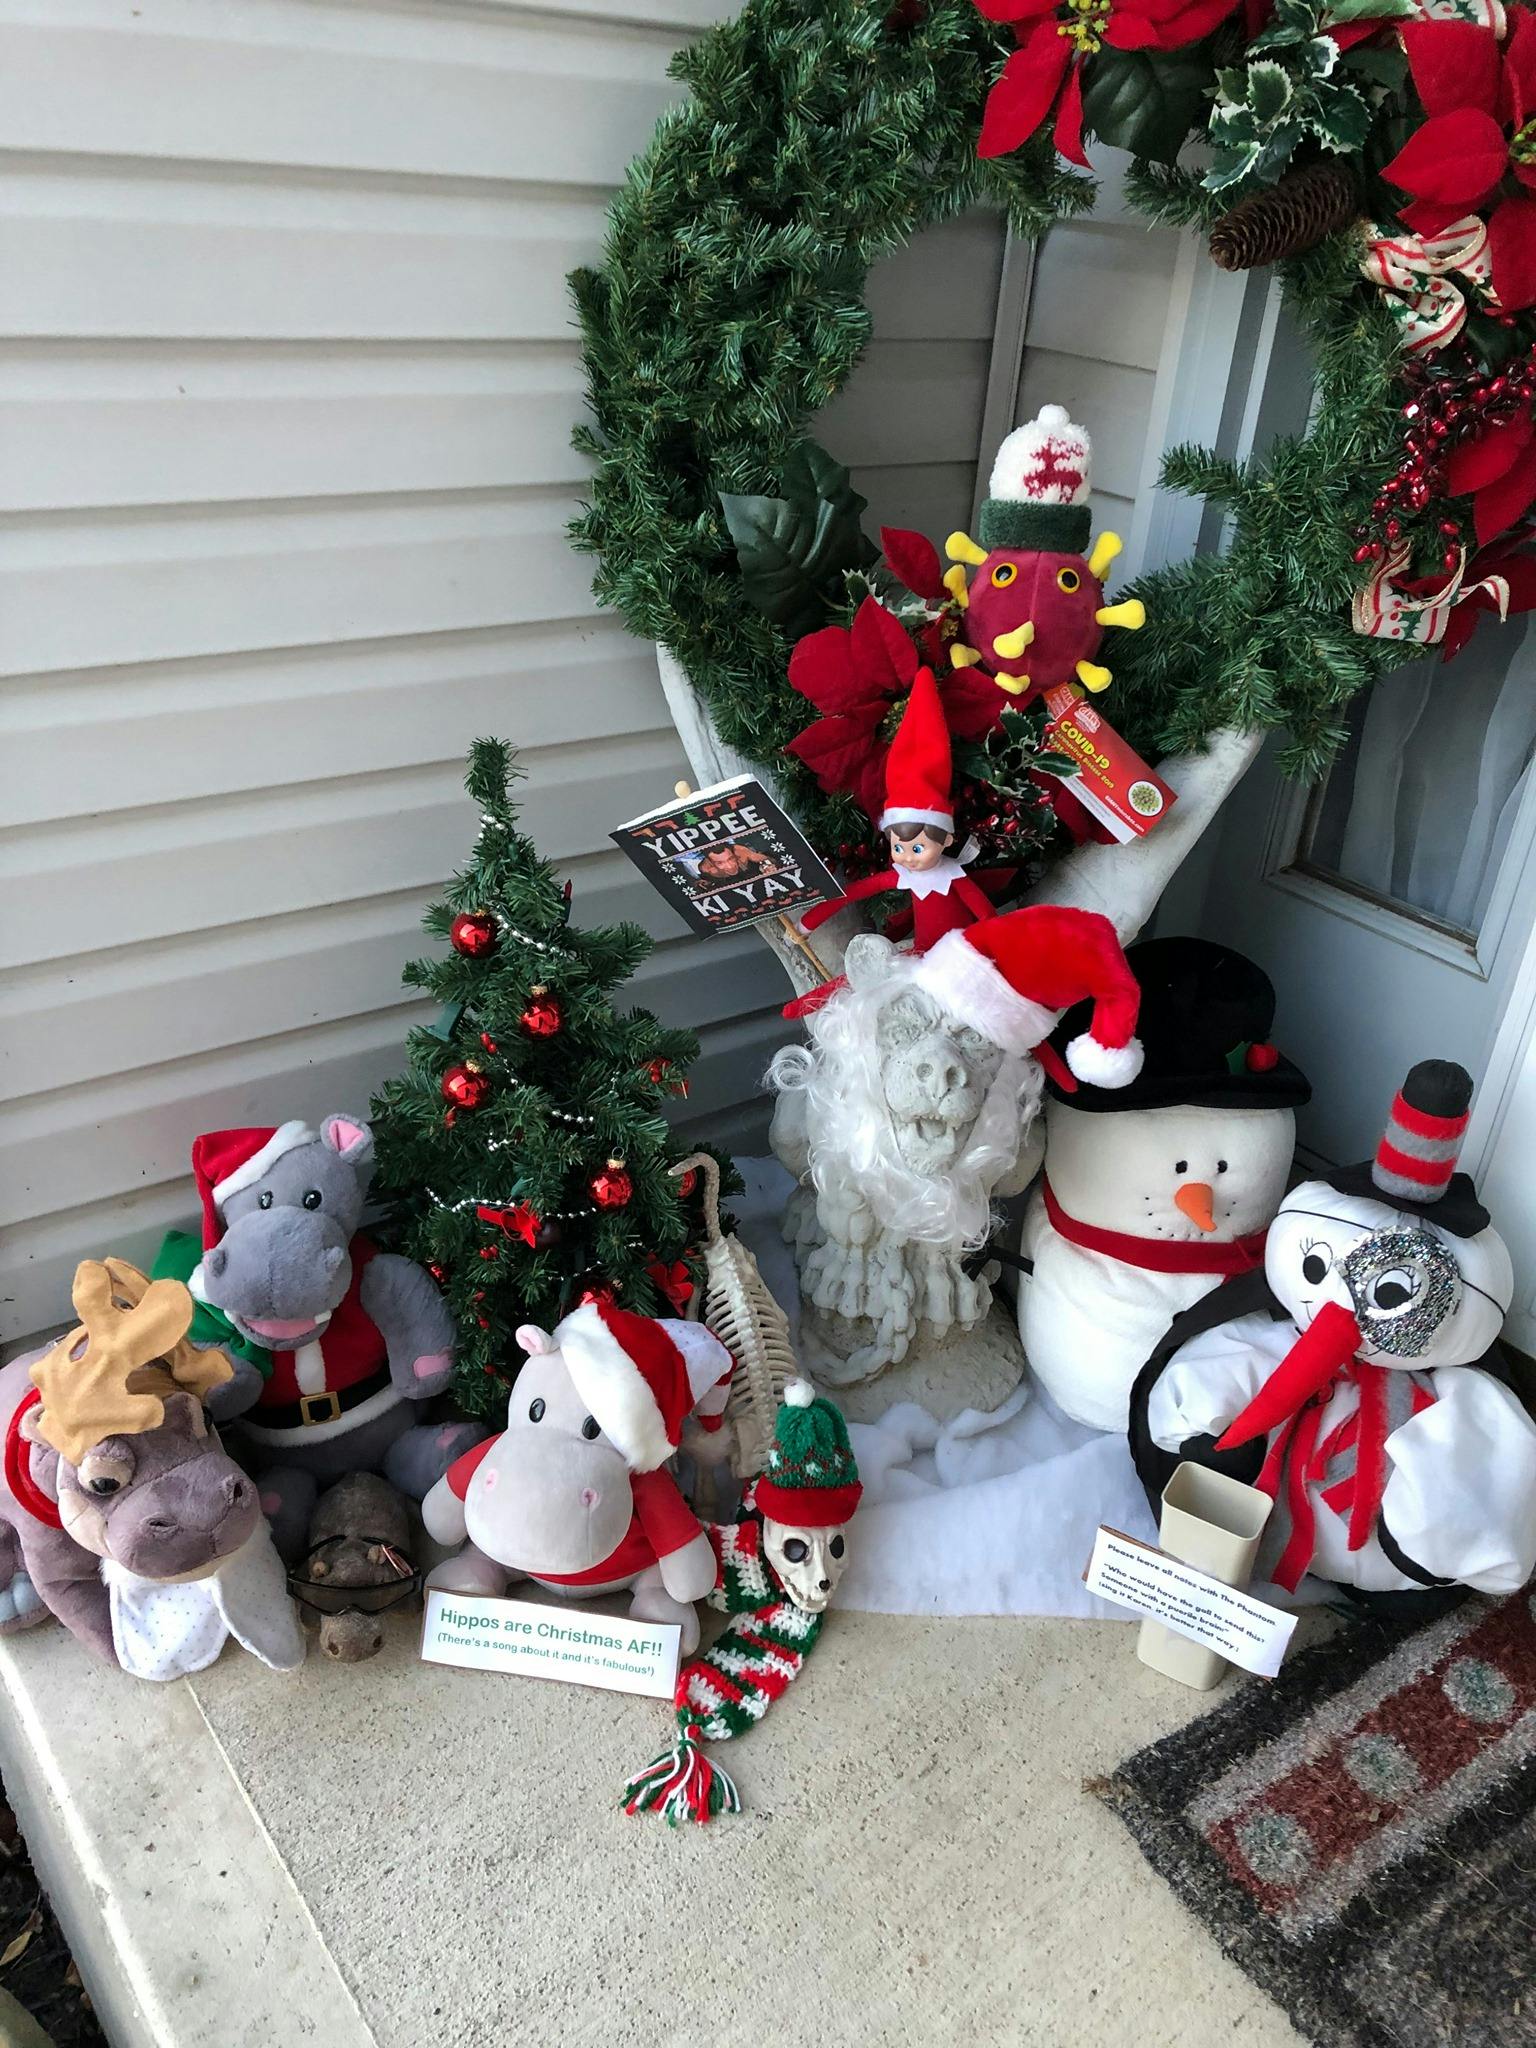 three hippos in Santa clothing, a small Christmas tree with red ornaments, Frank the Gargoyle, two plushie snowmen, an elf on the shelf holding a Die Hard placard and a Christmas hat wearing coronavirus plushie coming out of a wreath